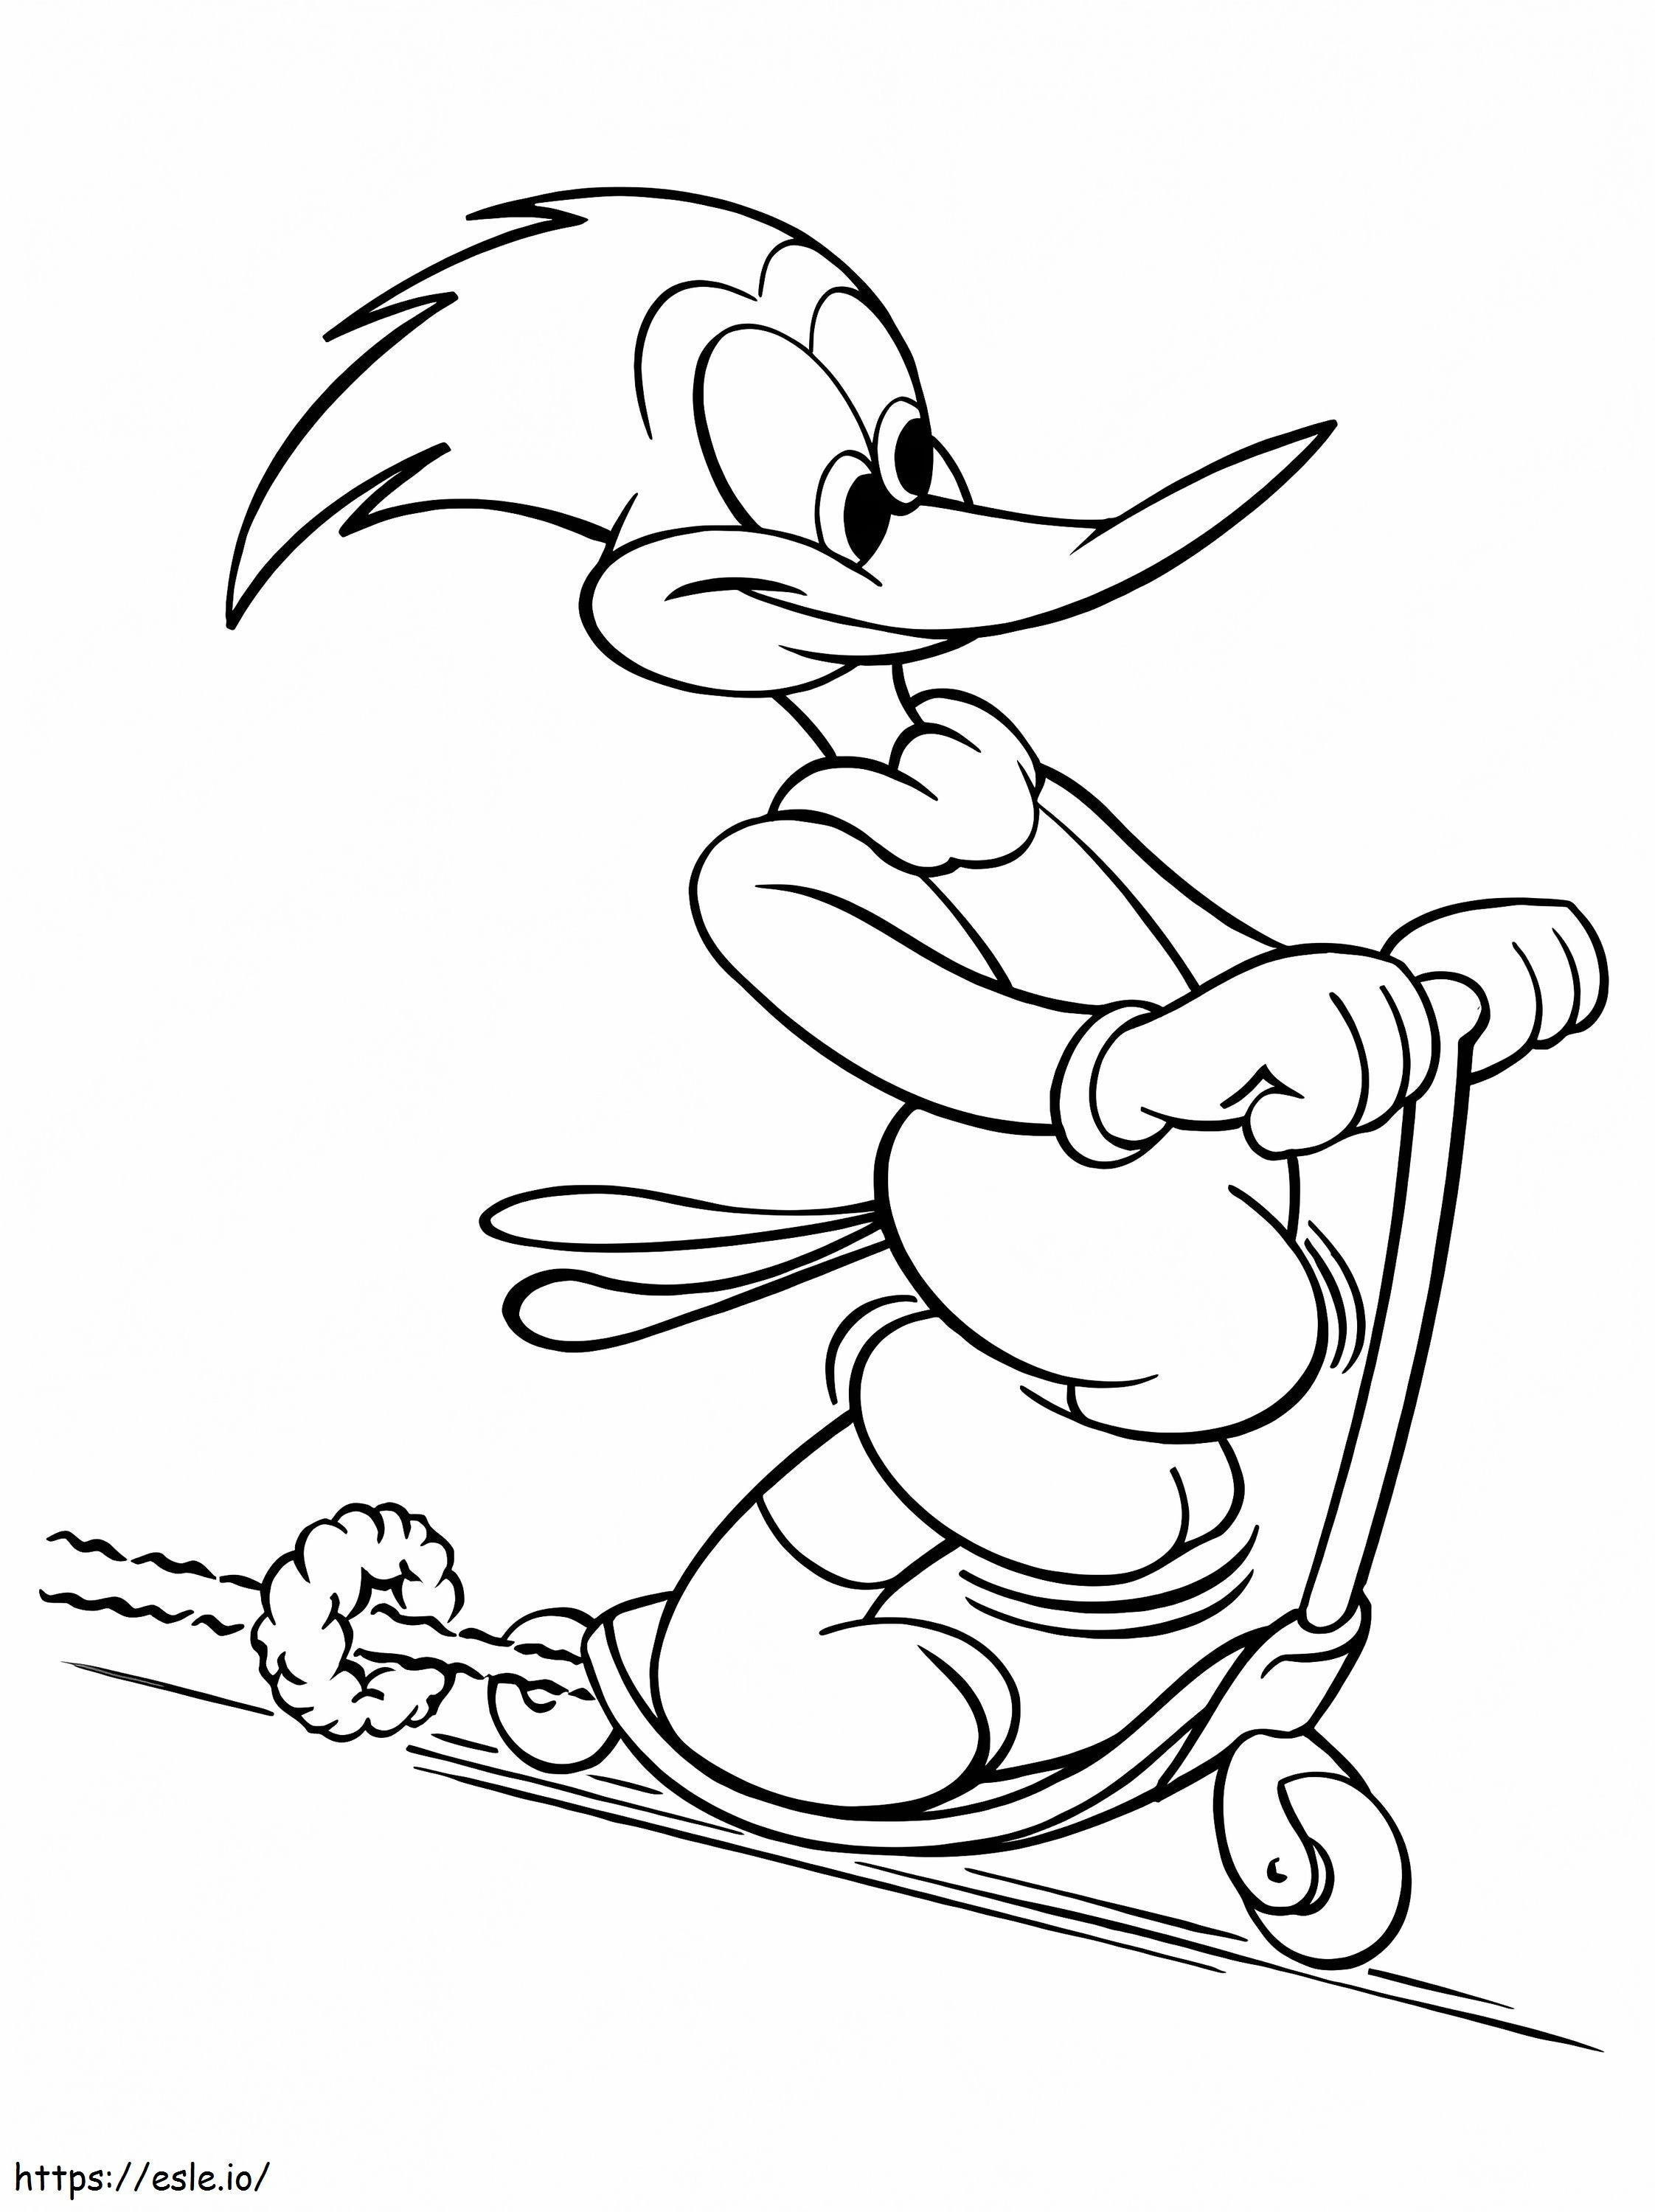 Woody Woodpecker 4 coloring page